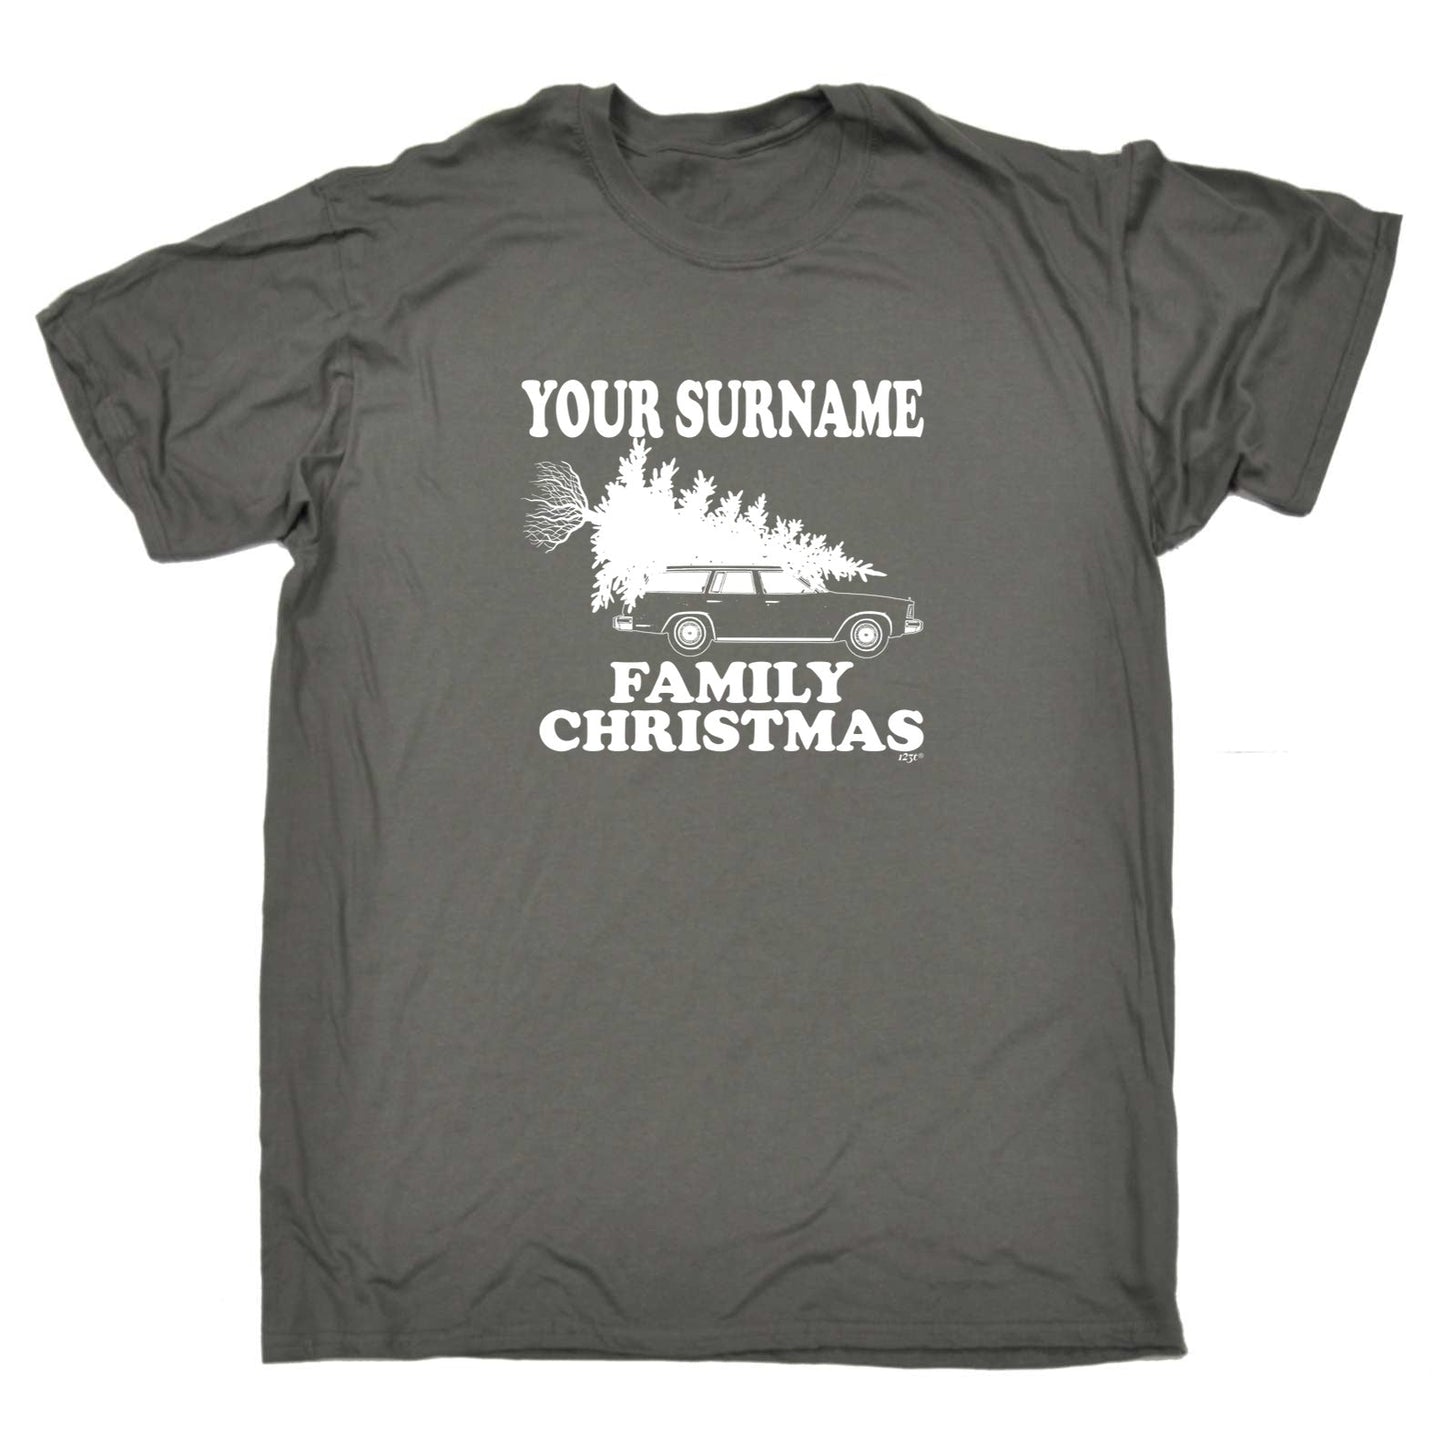 Family Christmas Your Surname Personalised - Mens Xmas Novelty T-Shirt / T Shirt